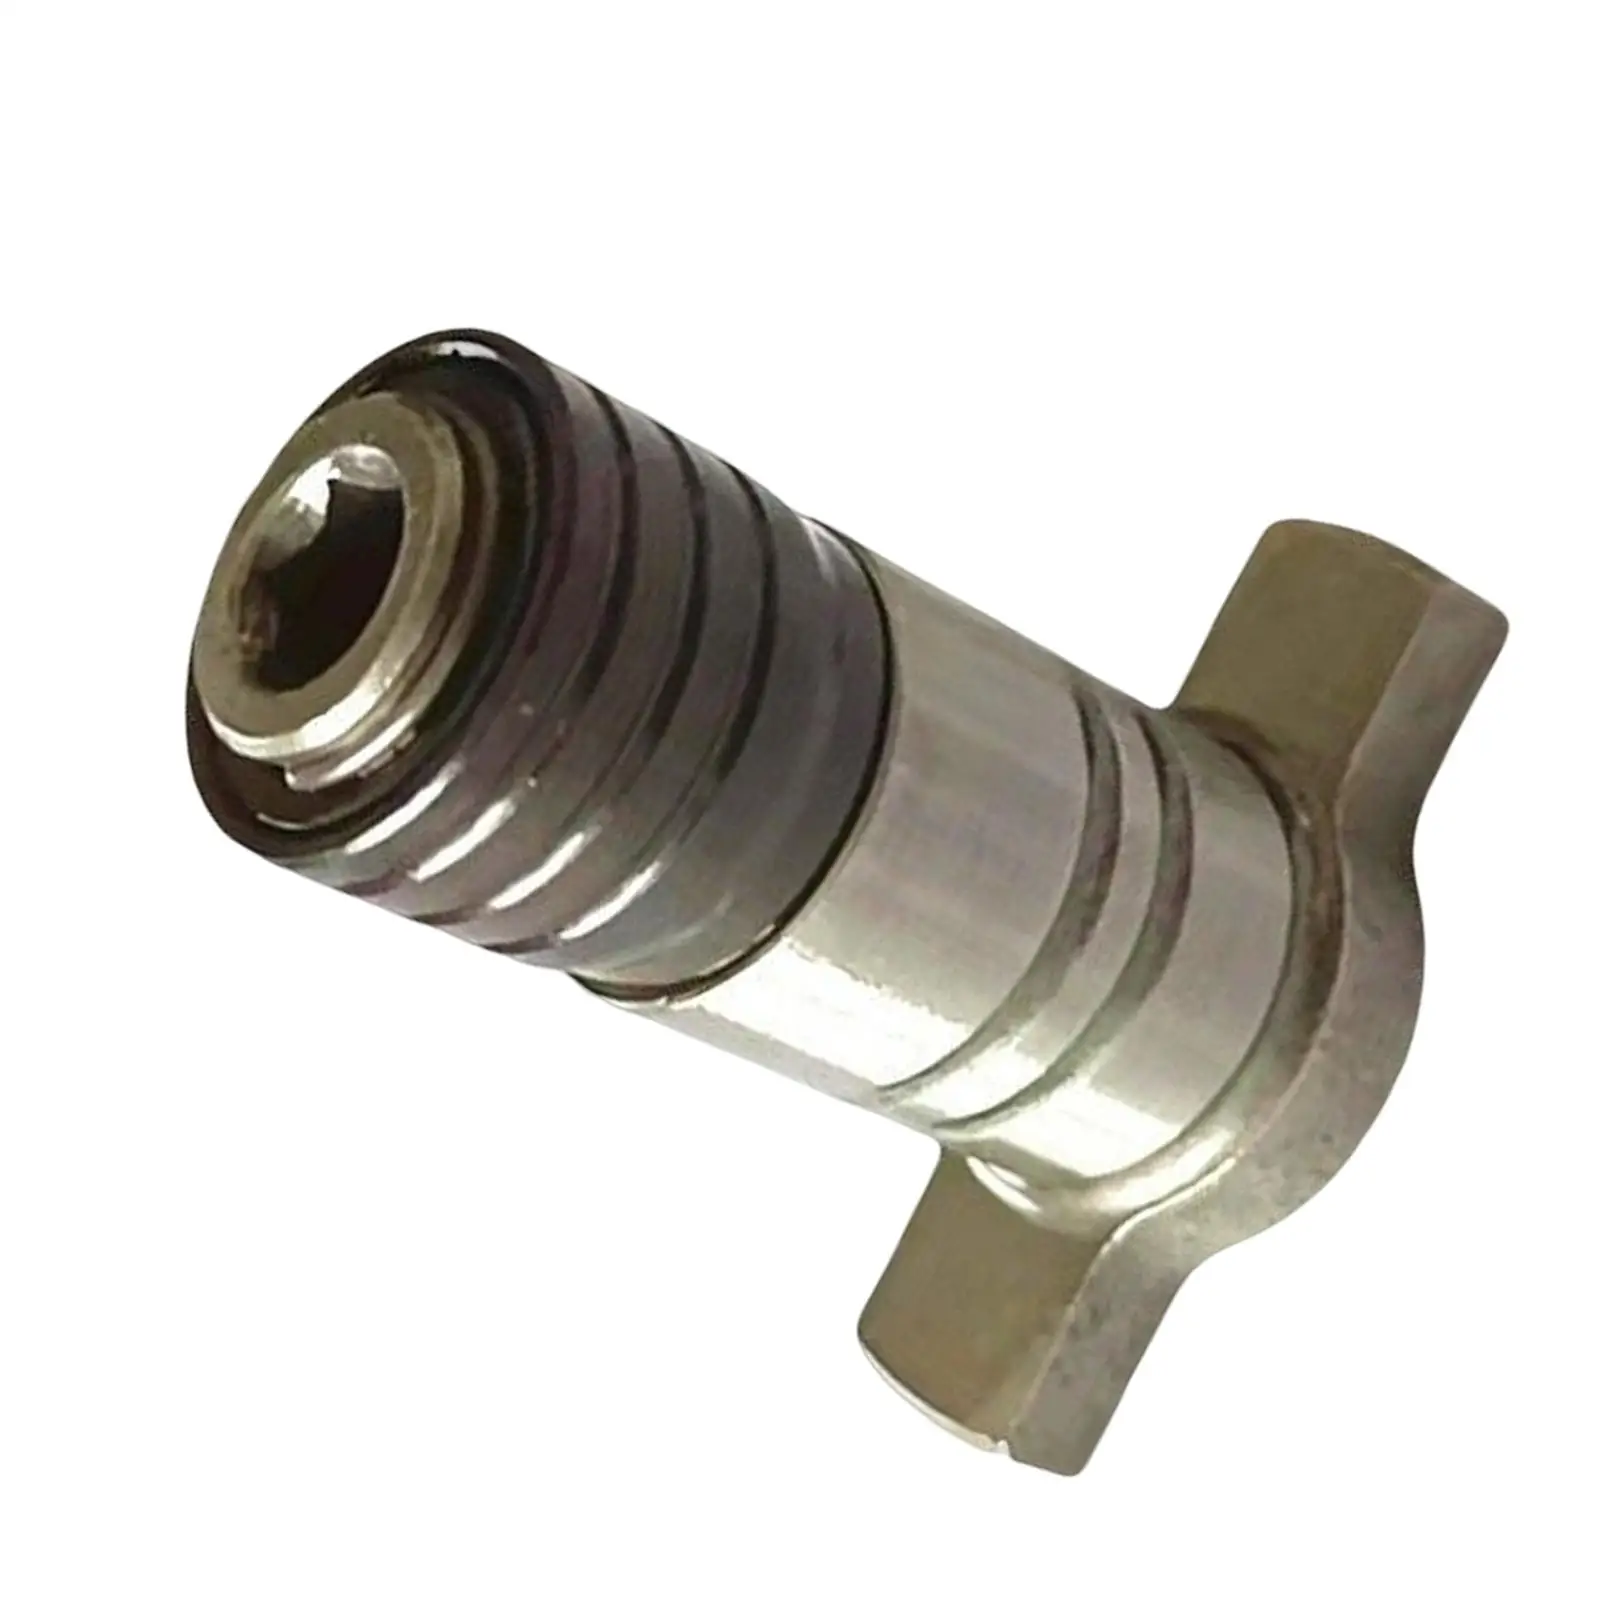 Wrench Shaft Drilling High Performance Dual Use Wrench Part for Hexagonal  Impact Drill Wrenches